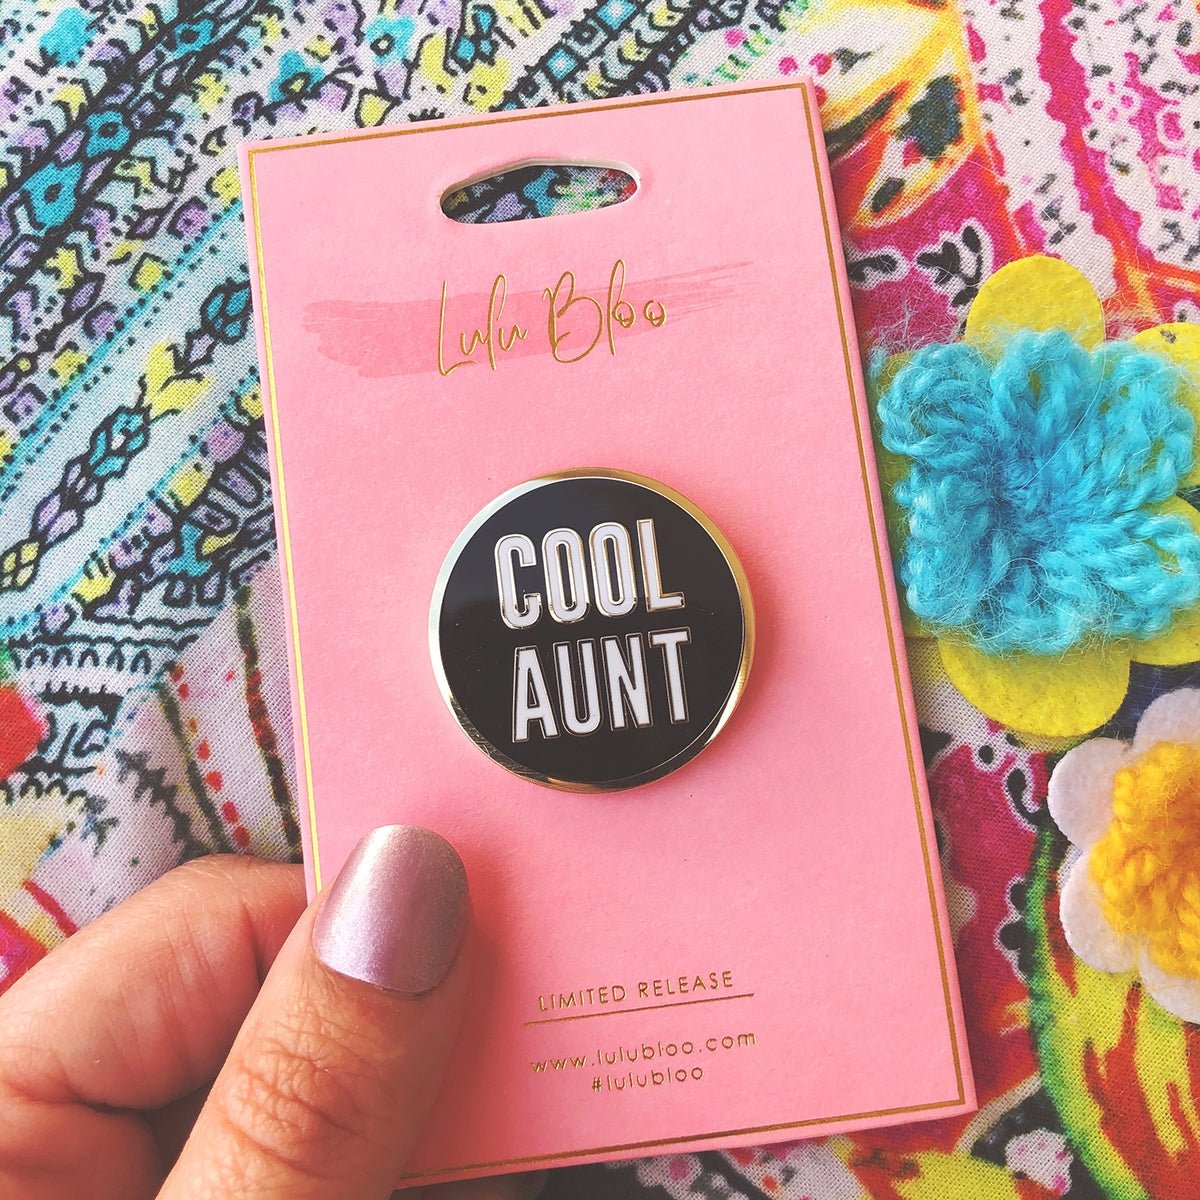 Cool Aunt Brass Lapel Pin in Black or Pink